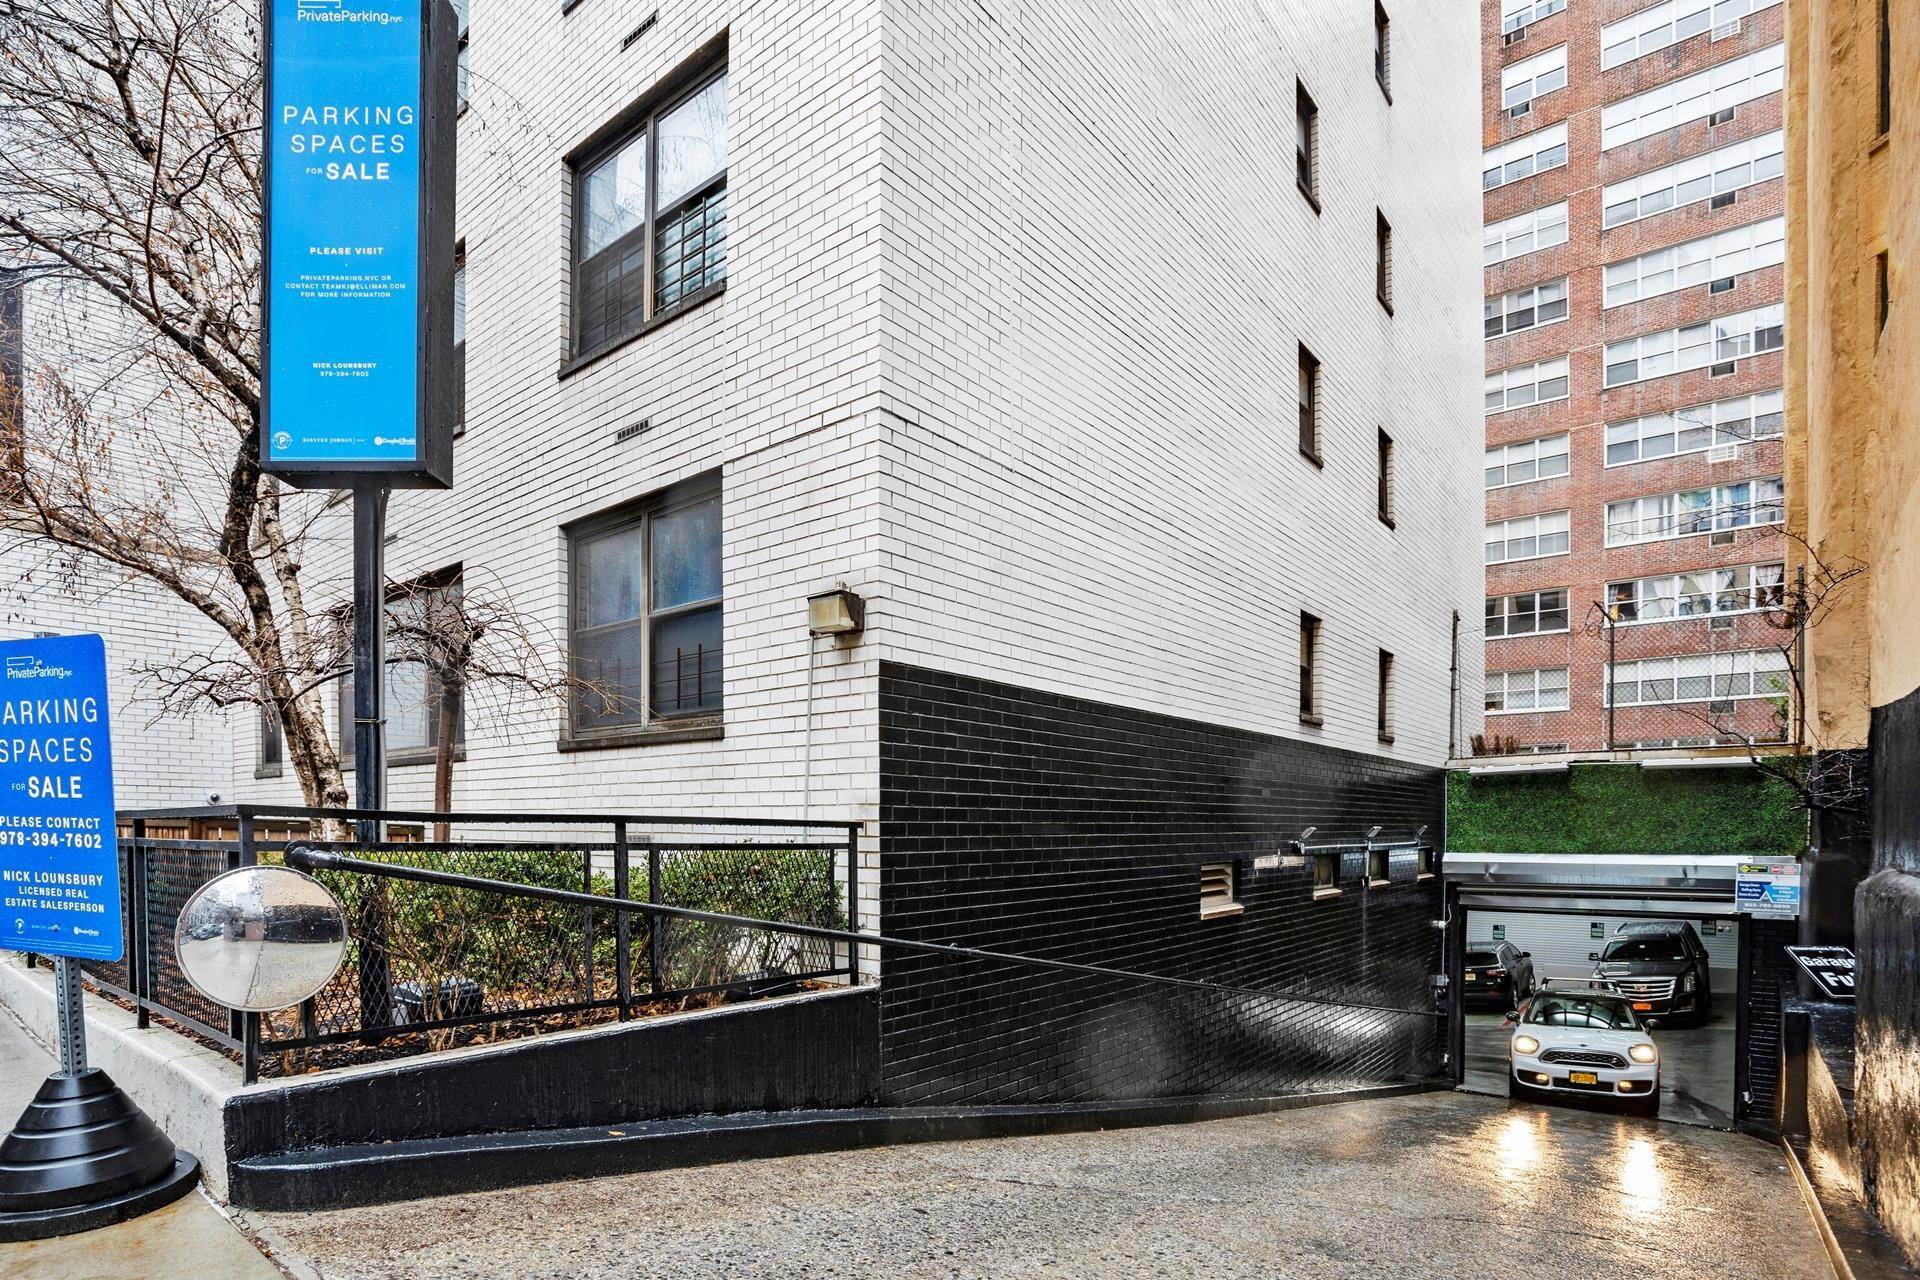 Cooperative for Sale at Upper East Side, Manhattan, NY 10021